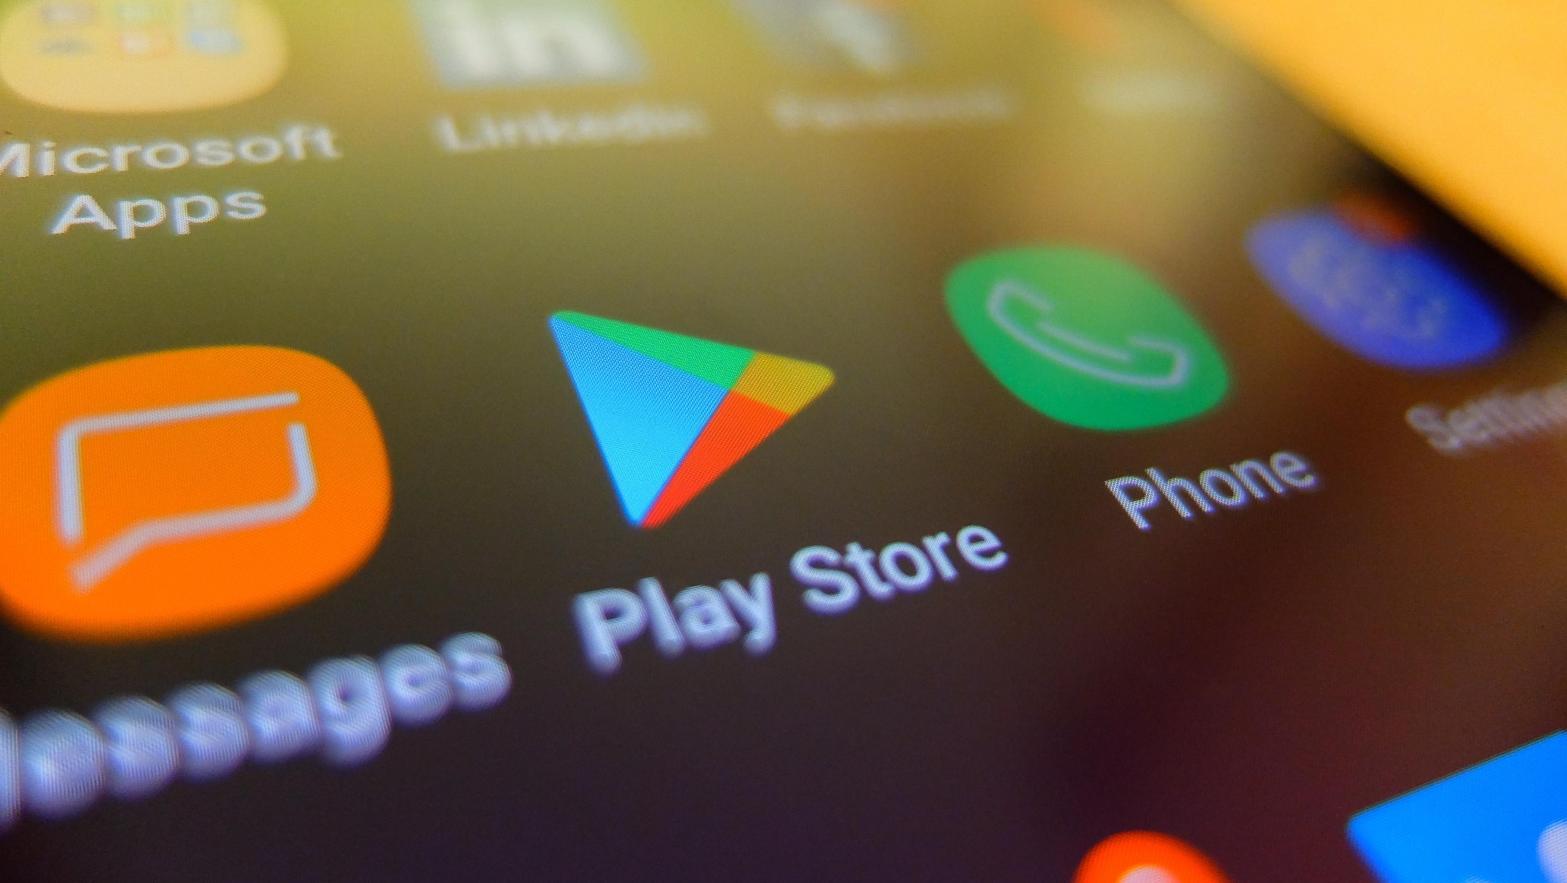 Google has been routinely notified about malware-containing apps listed on Play Store, but it has routinely failed at catching already-identified malware code. (Photo: East pop, Shutterstock)